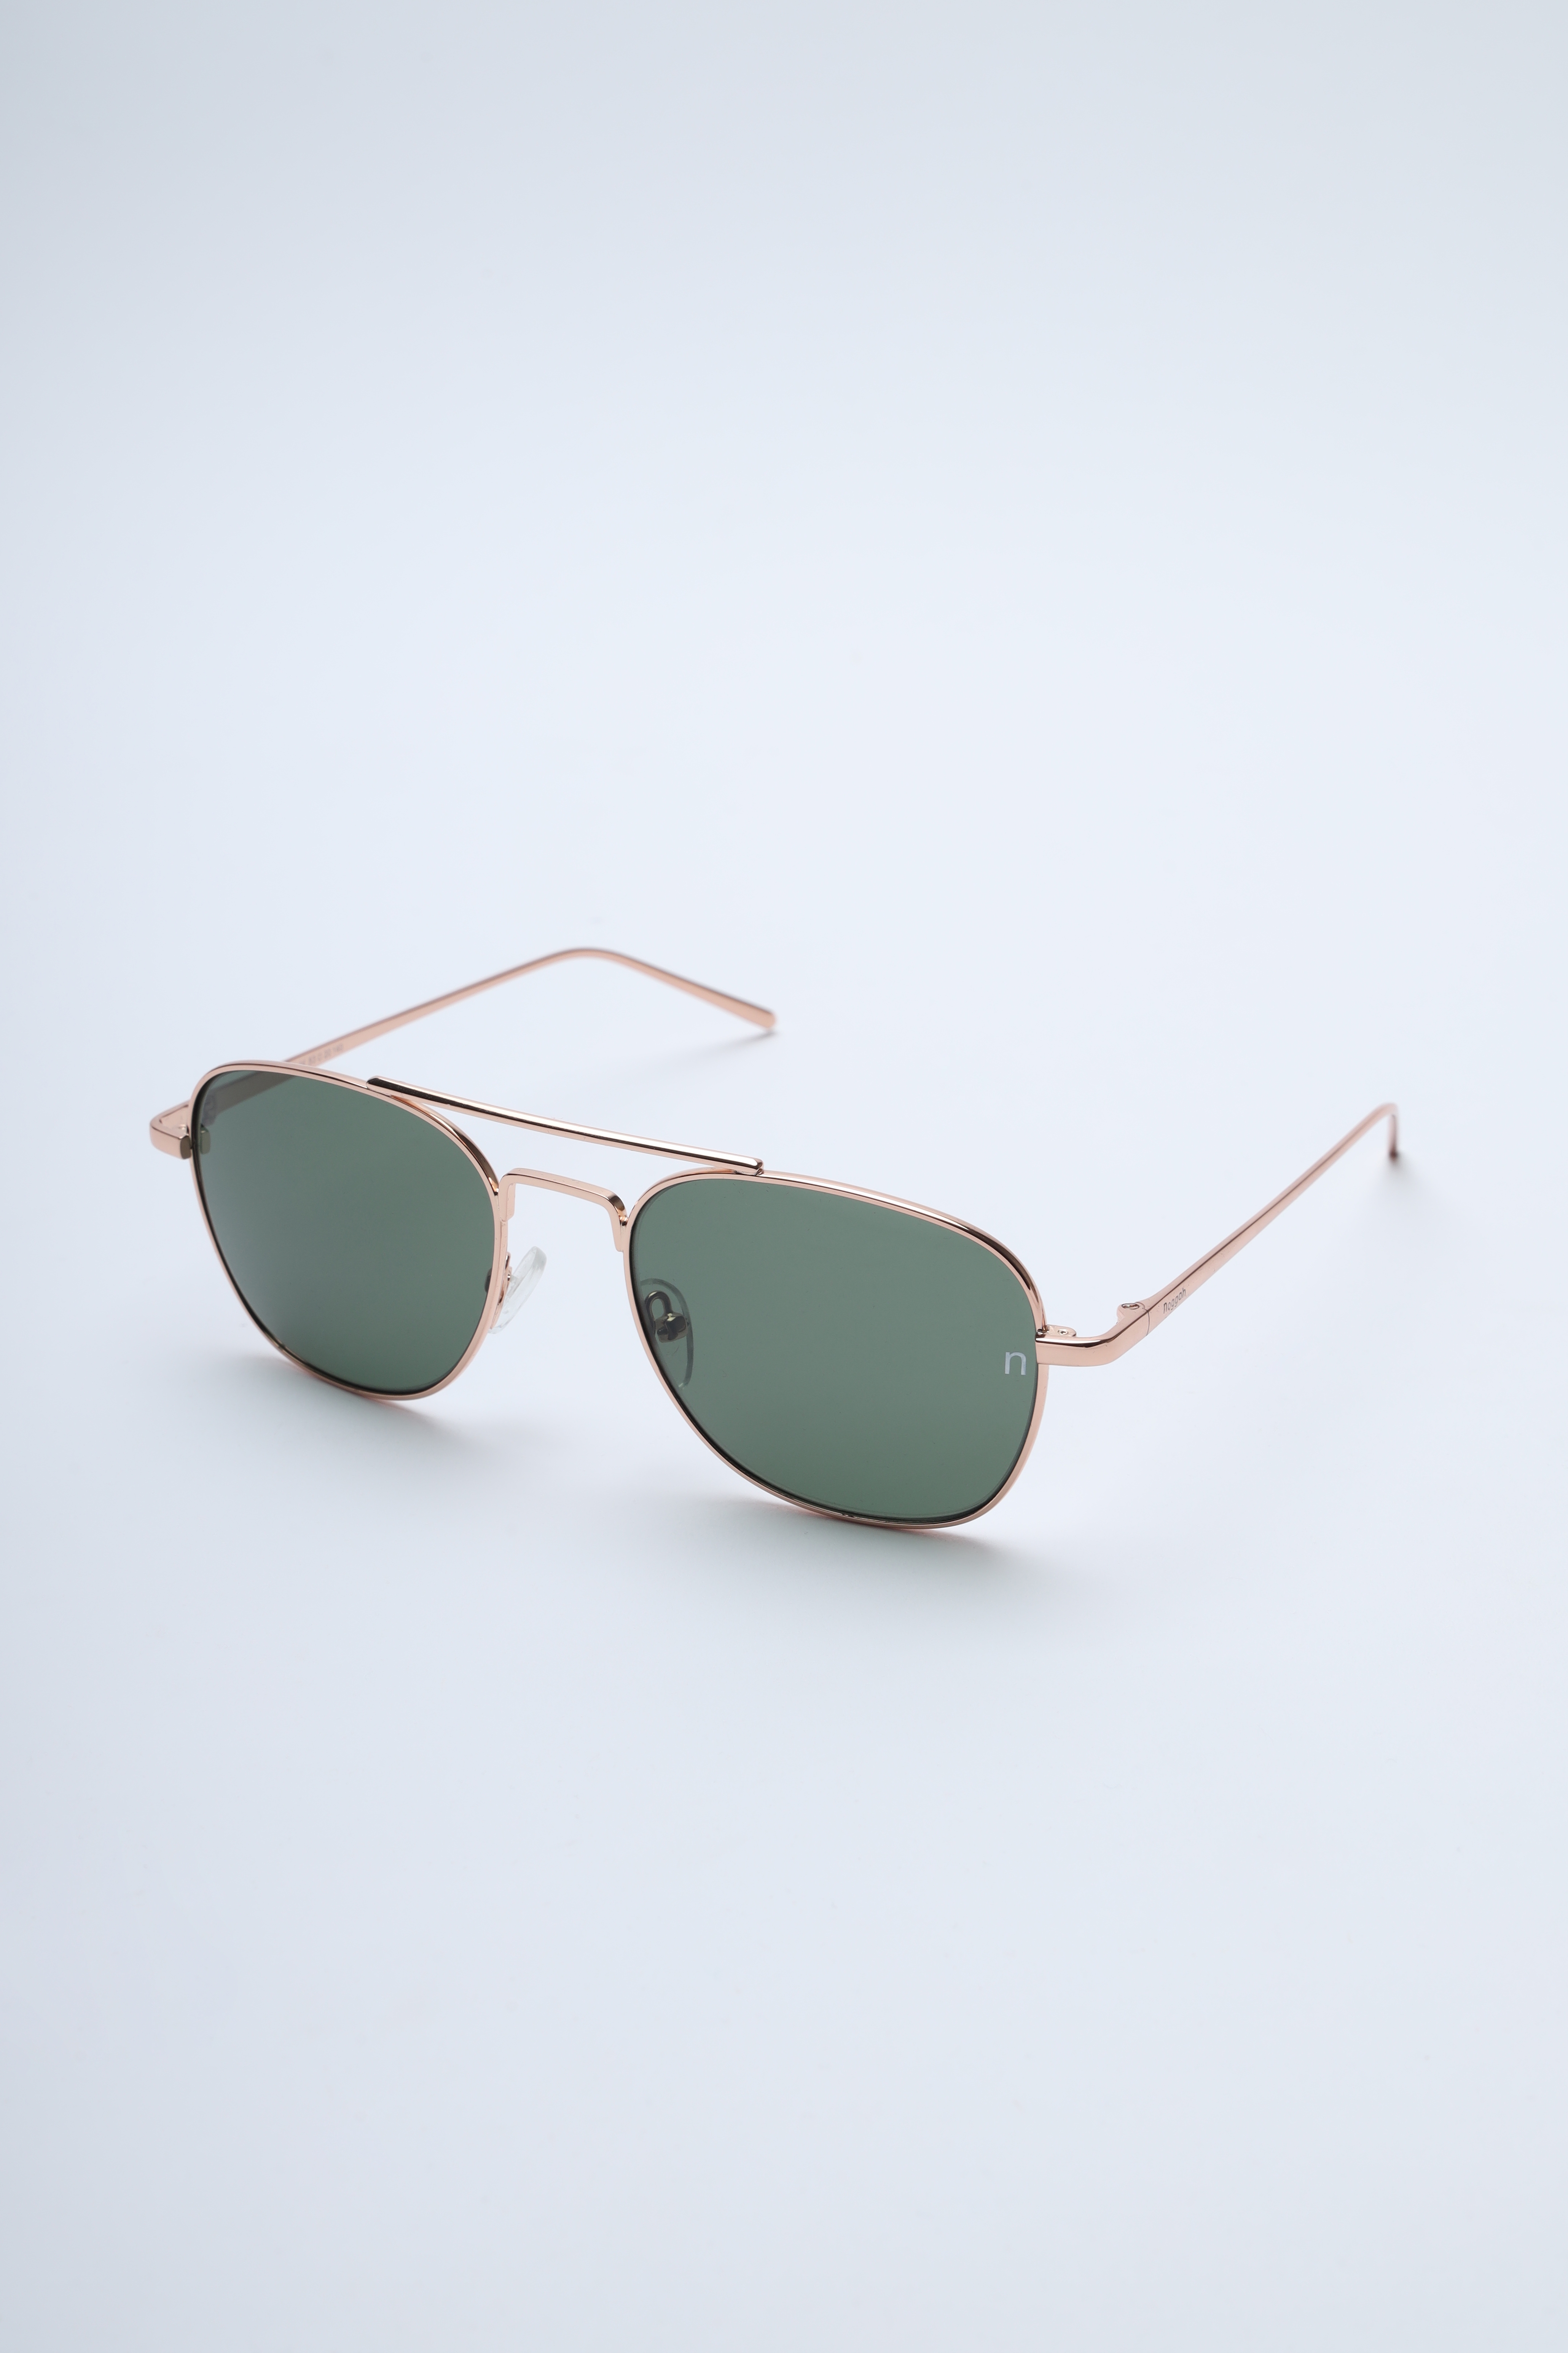 Noggah | Noggah Stainless Steel Gold Frame with Green Glass UV Protection Lens  Large Size Unisex Sunglasses